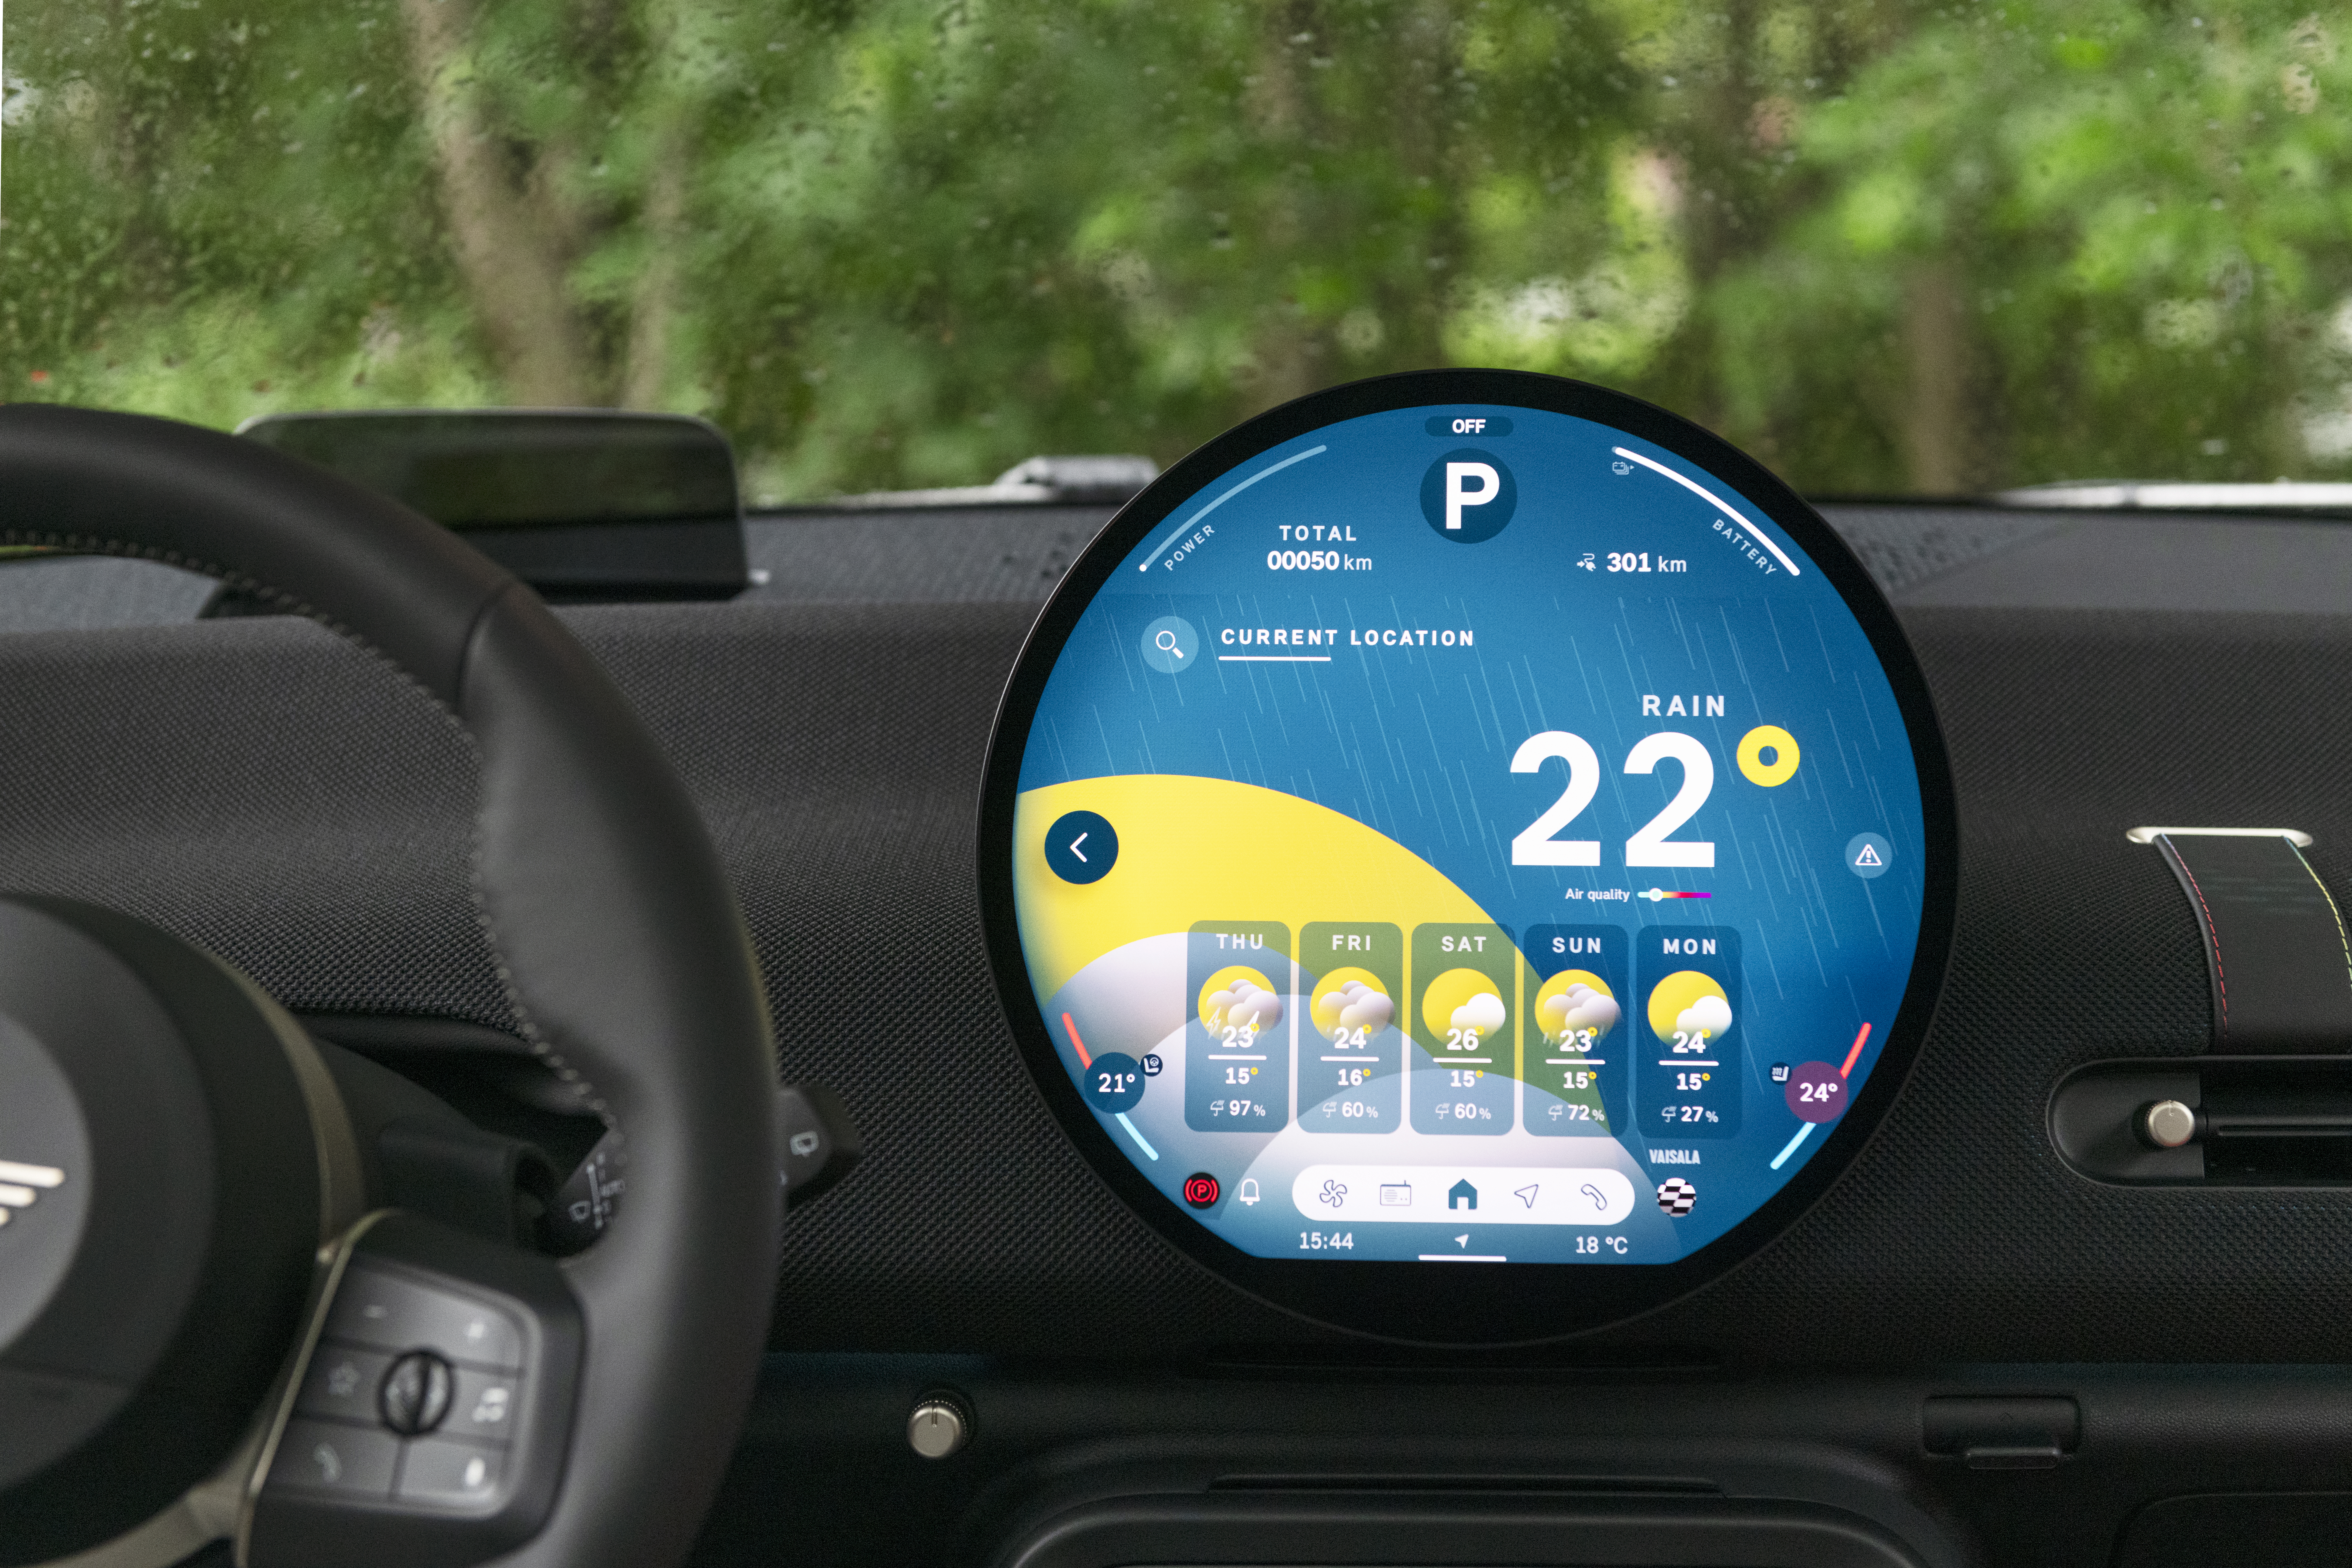 Vaisala Xweather weather and air quality data on BMW-Group Mini car infotainment system